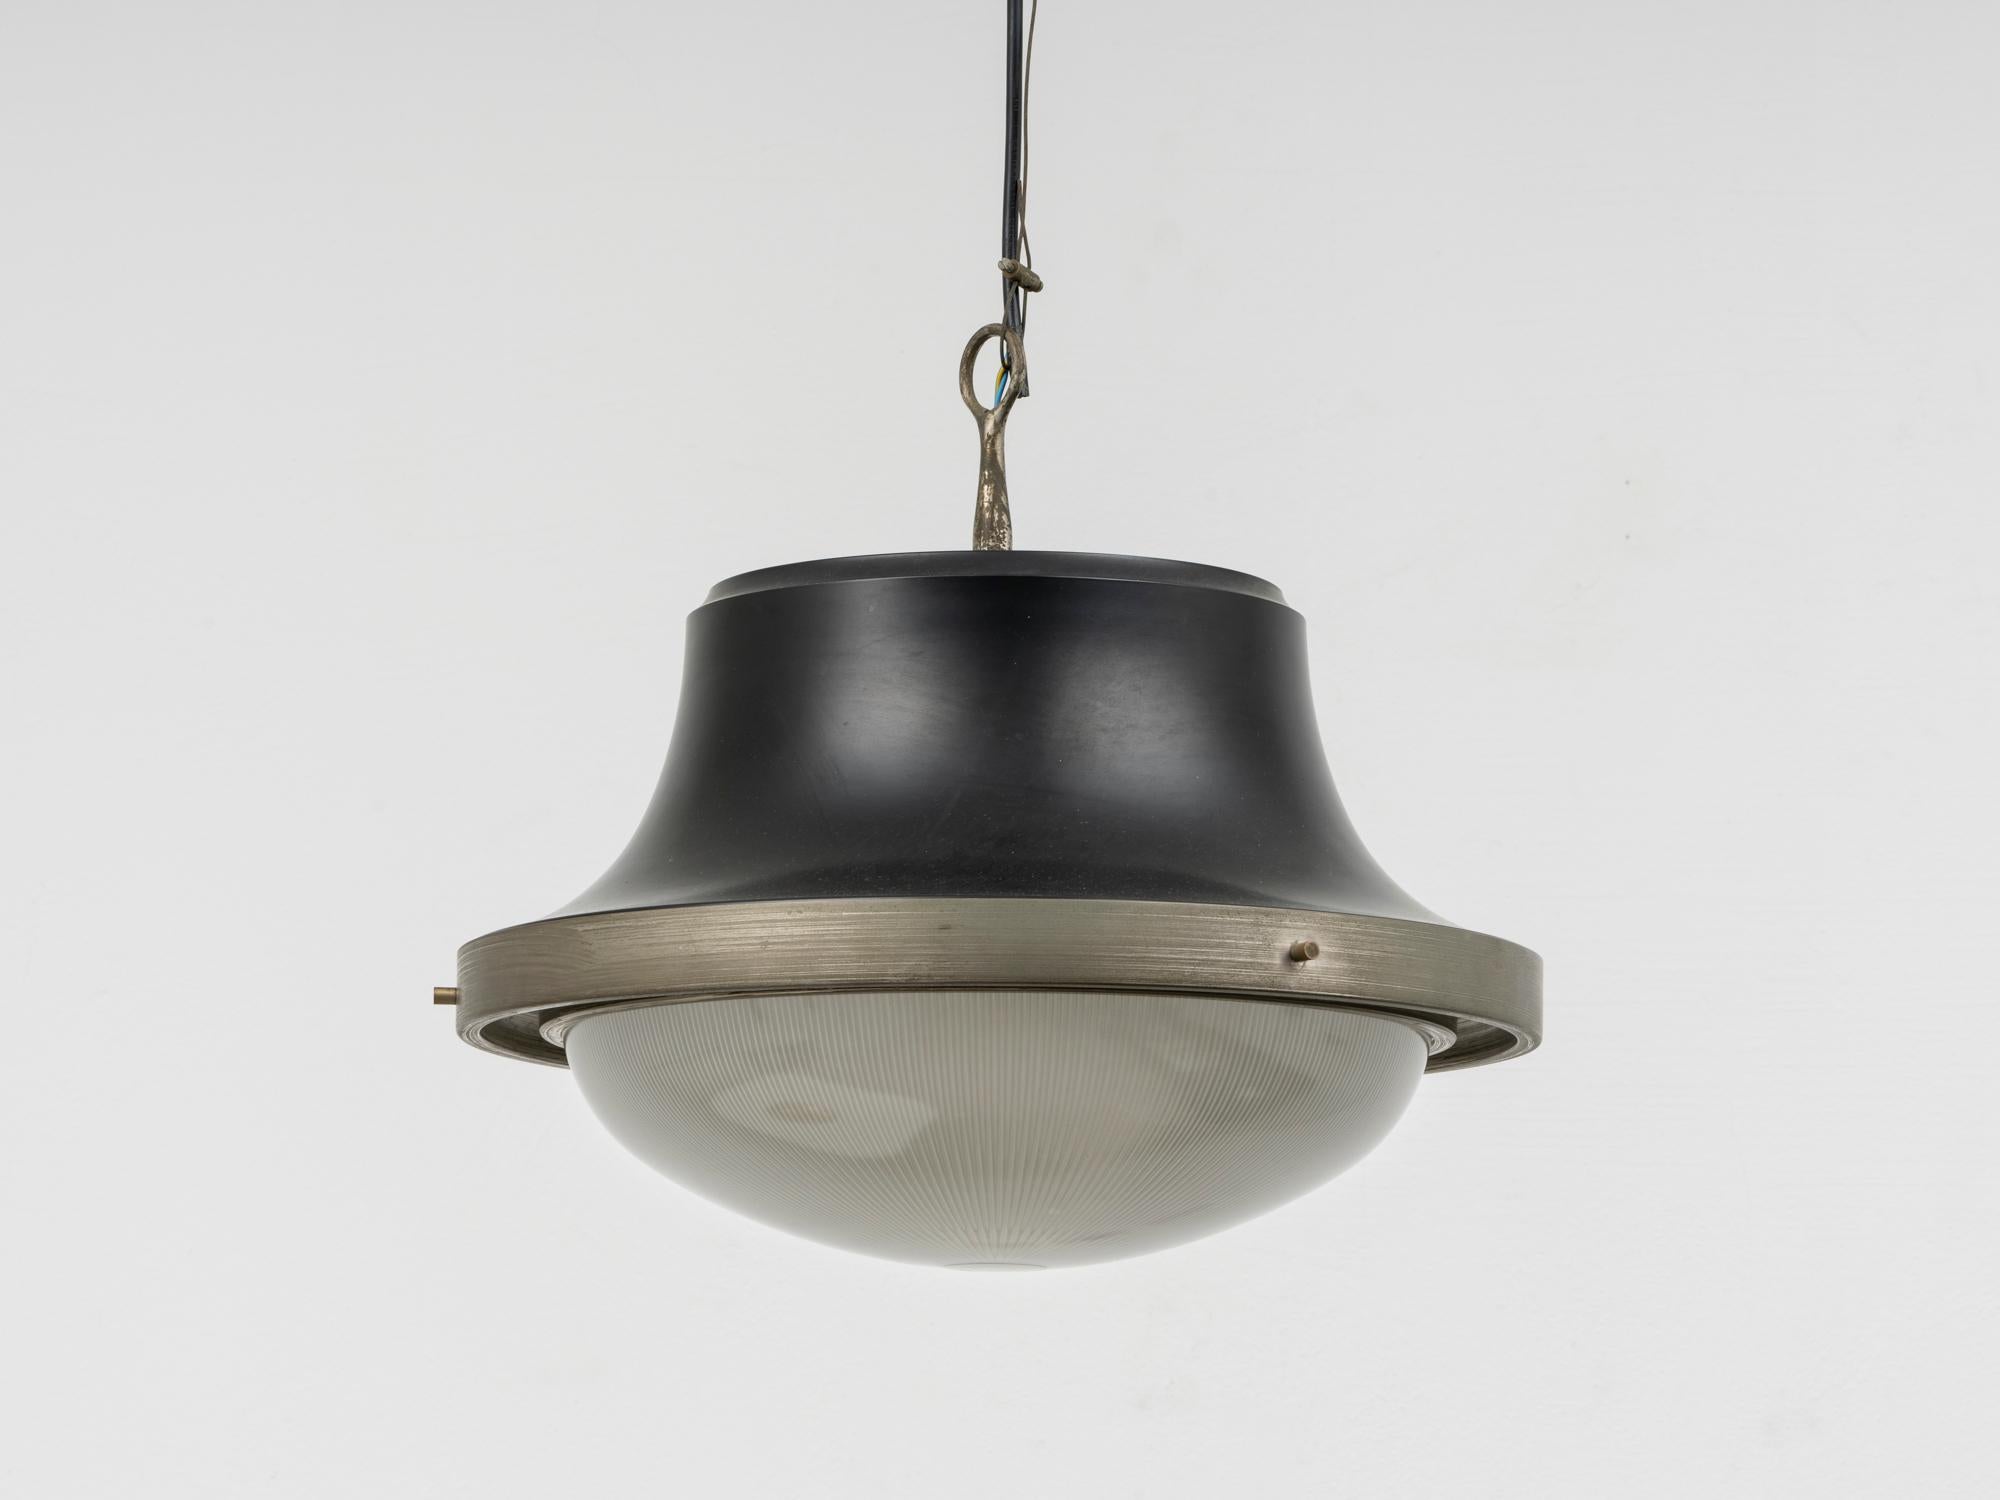 This pendant lamp was designed by Sergio Mazza in 1960 and produced by Artemide, the company that he had founded together with Ernesto Gismondi in 1959. This lamp, known as  